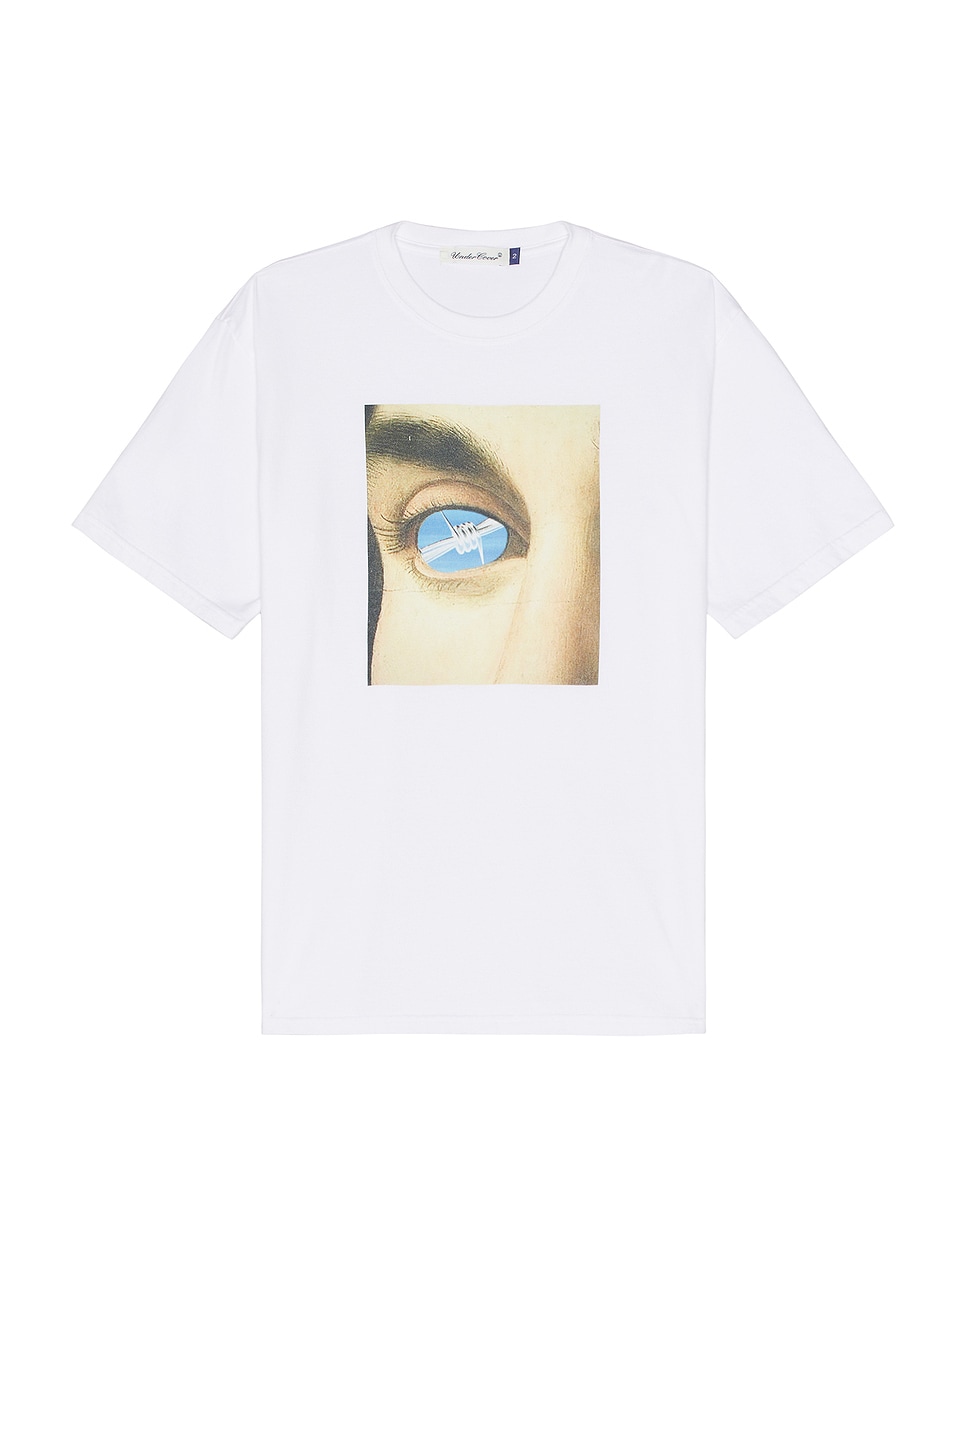 Image 1 of Undercover Tee in White